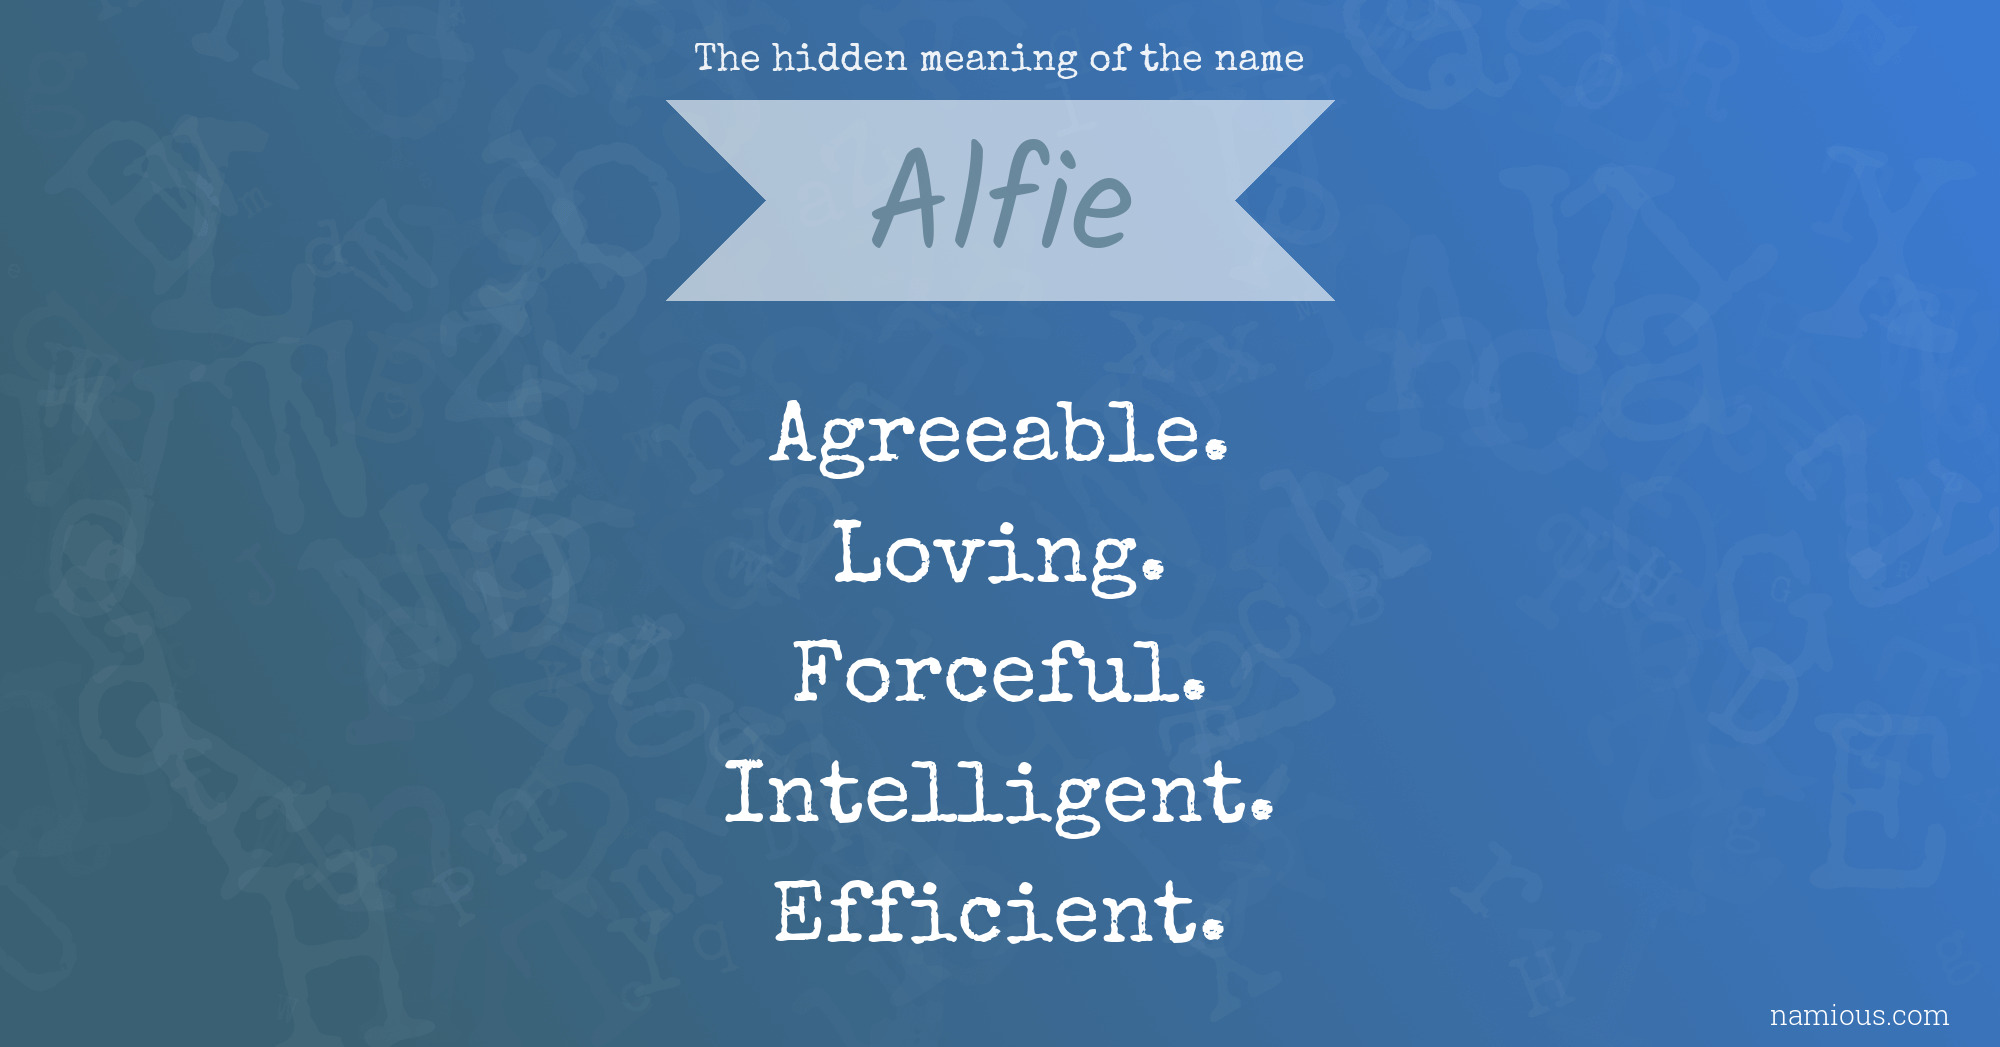 The hidden meaning of the name Alfie